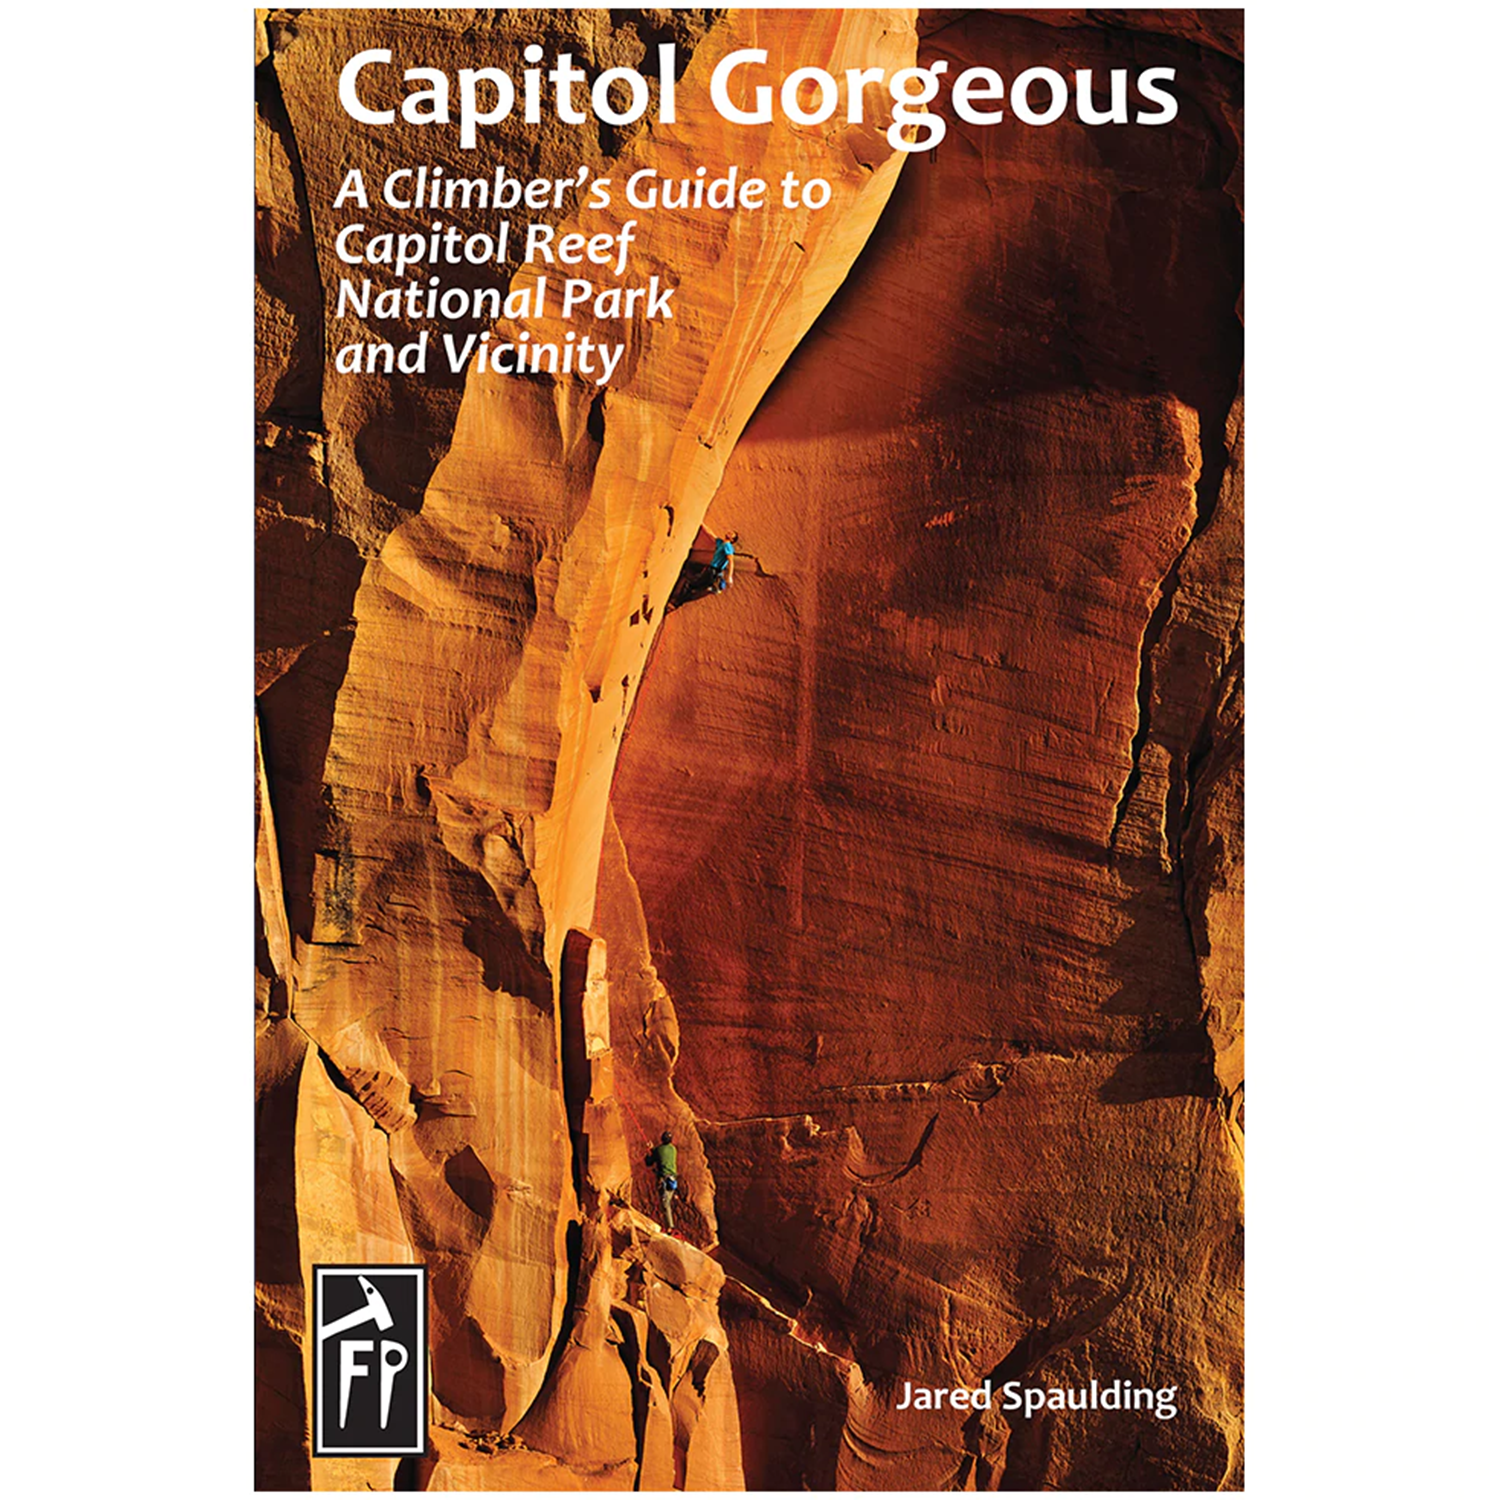 Capitol Gorgeous : A Climber's Guide to Capitol Reef National Park and Vicinity